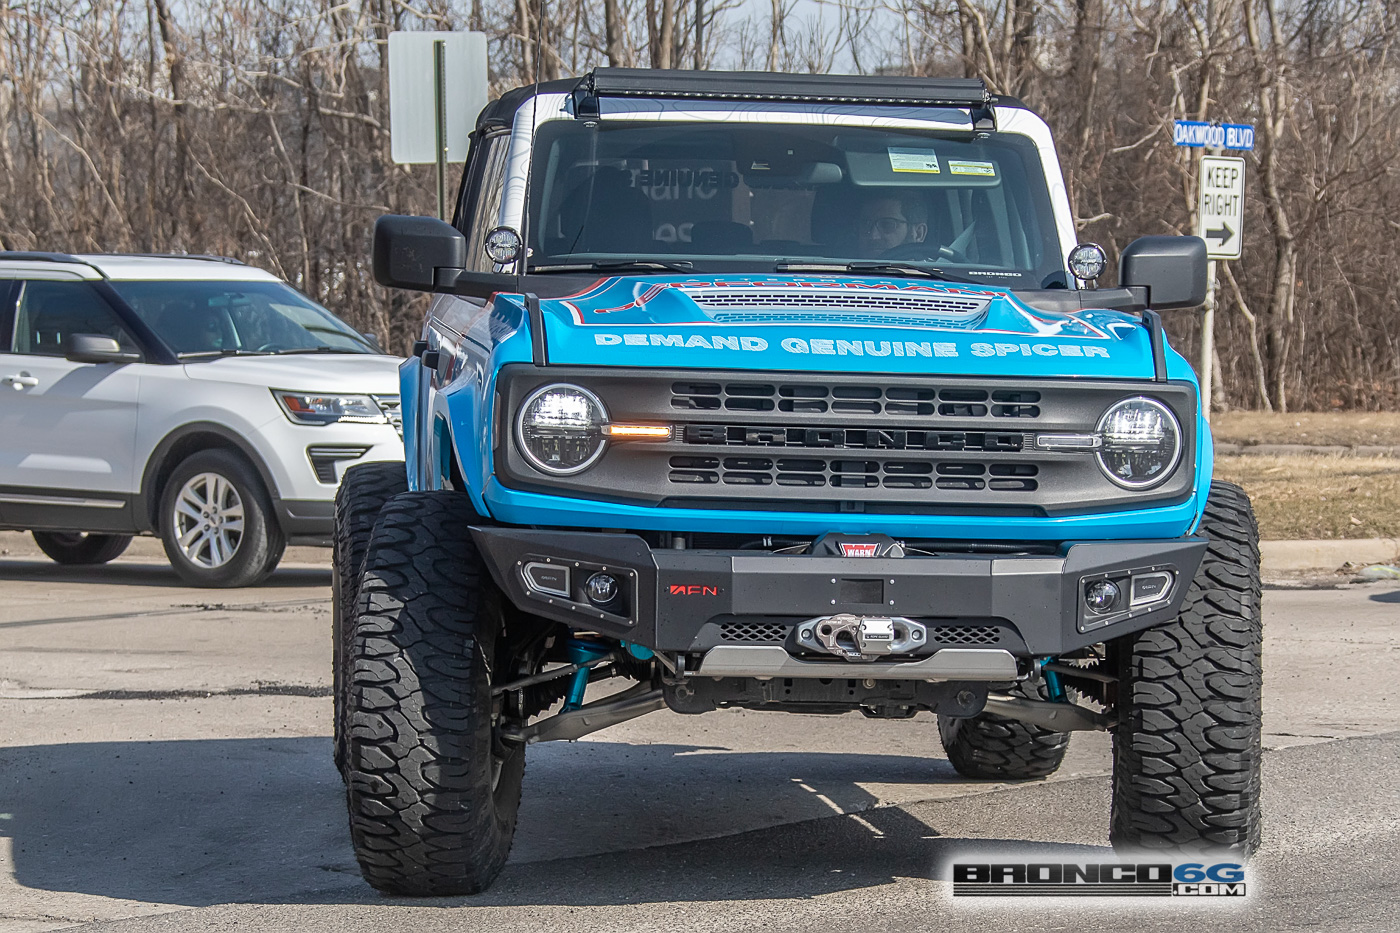 Ford Bronco The "Ultimate Ford Bronco Build" Caught Testing On The Streets Of Dearborn 1062C5D6-64FD-44E9-9377-88D724D7FB44